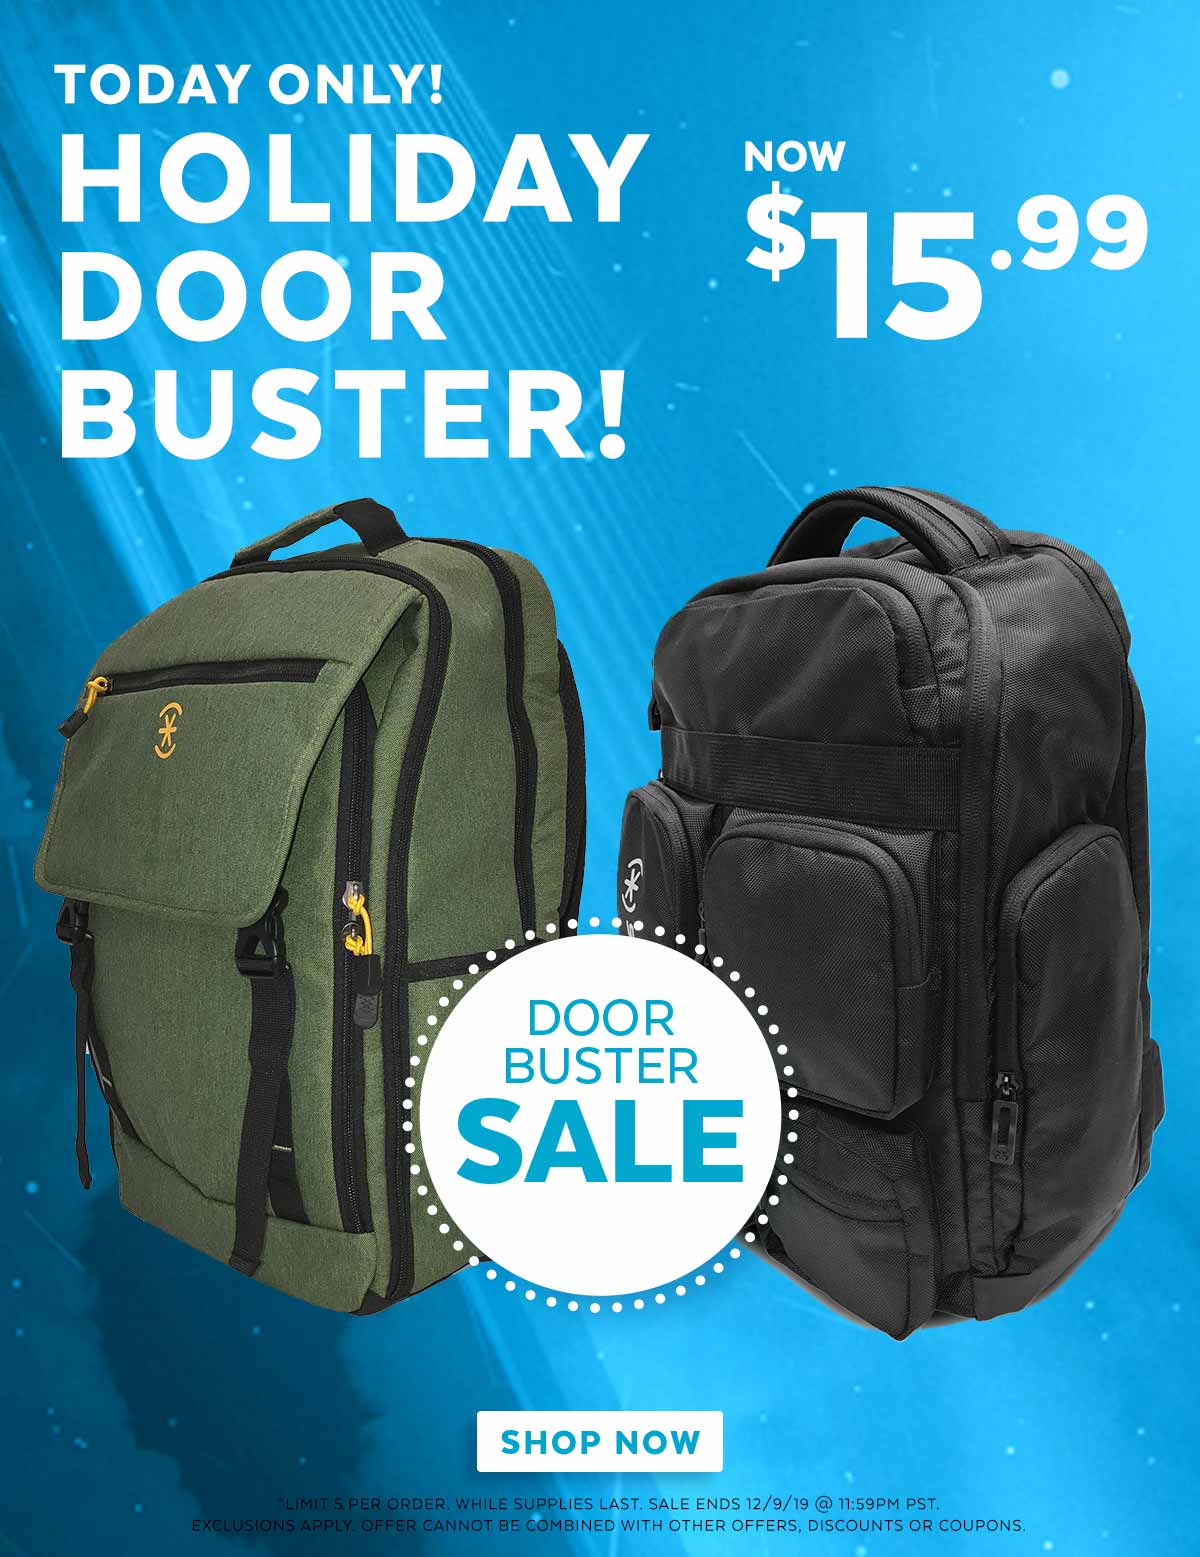 Today only! Holiday Door Buster! Now $15.99.  Shop now. Limit 5 per order. Sale ends 12/9/19 @ 11:59pm PST. Exclusions apply. Offer cannot be combined with other offers, discounts or coupons.